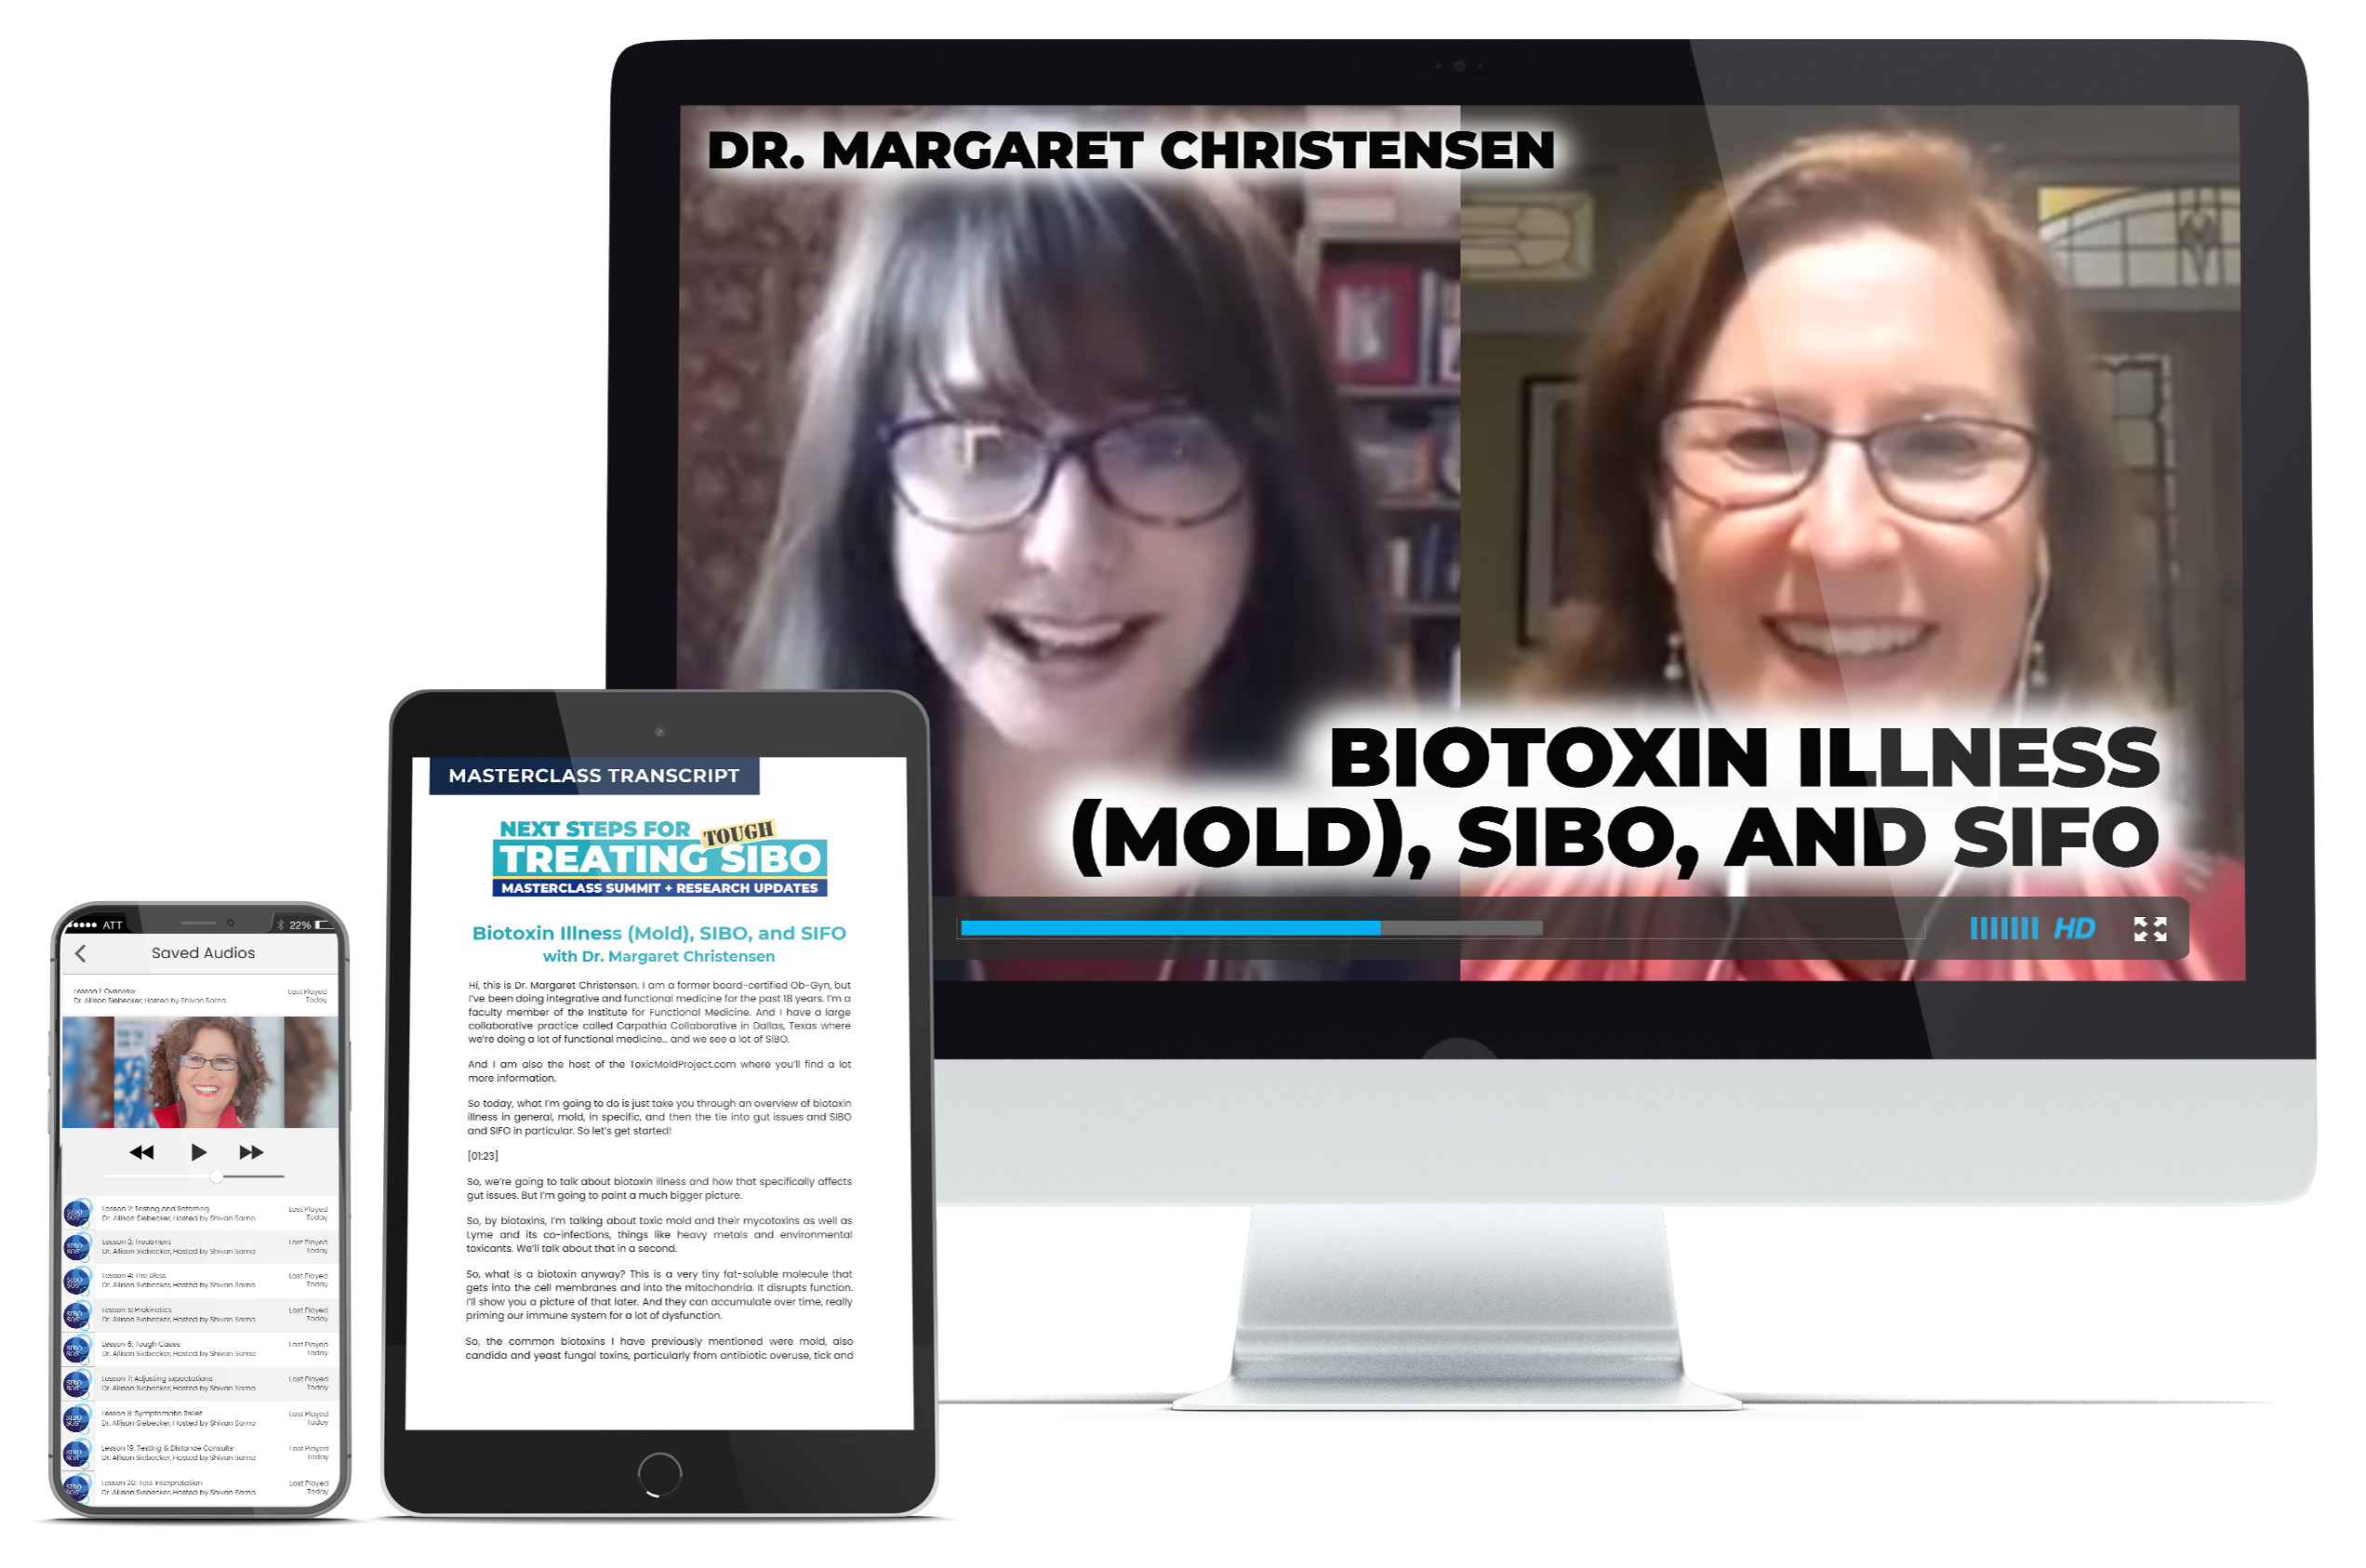 Biotoxin Illness (Mold), SIBO, and SIFO​ with Dr. Margaret Christensen